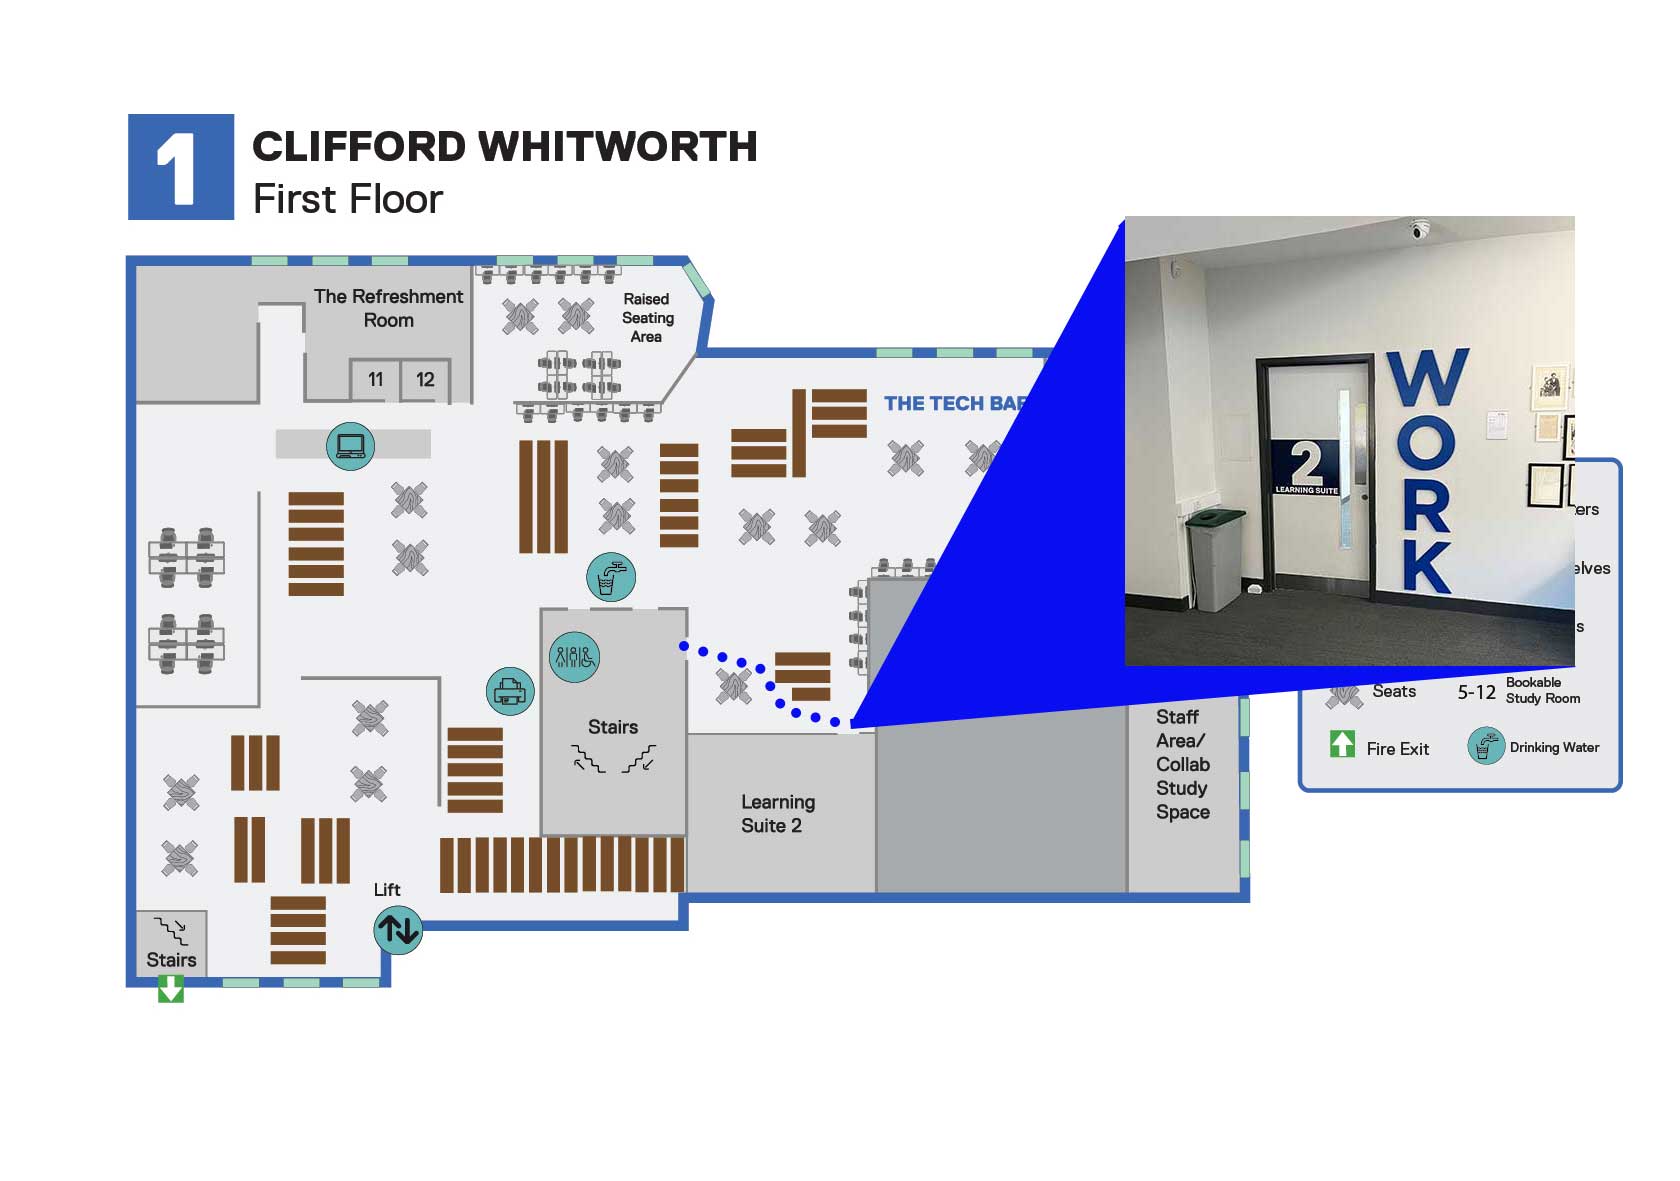 The Learning suite 2 on the first floor of Clifford Whitworth Library